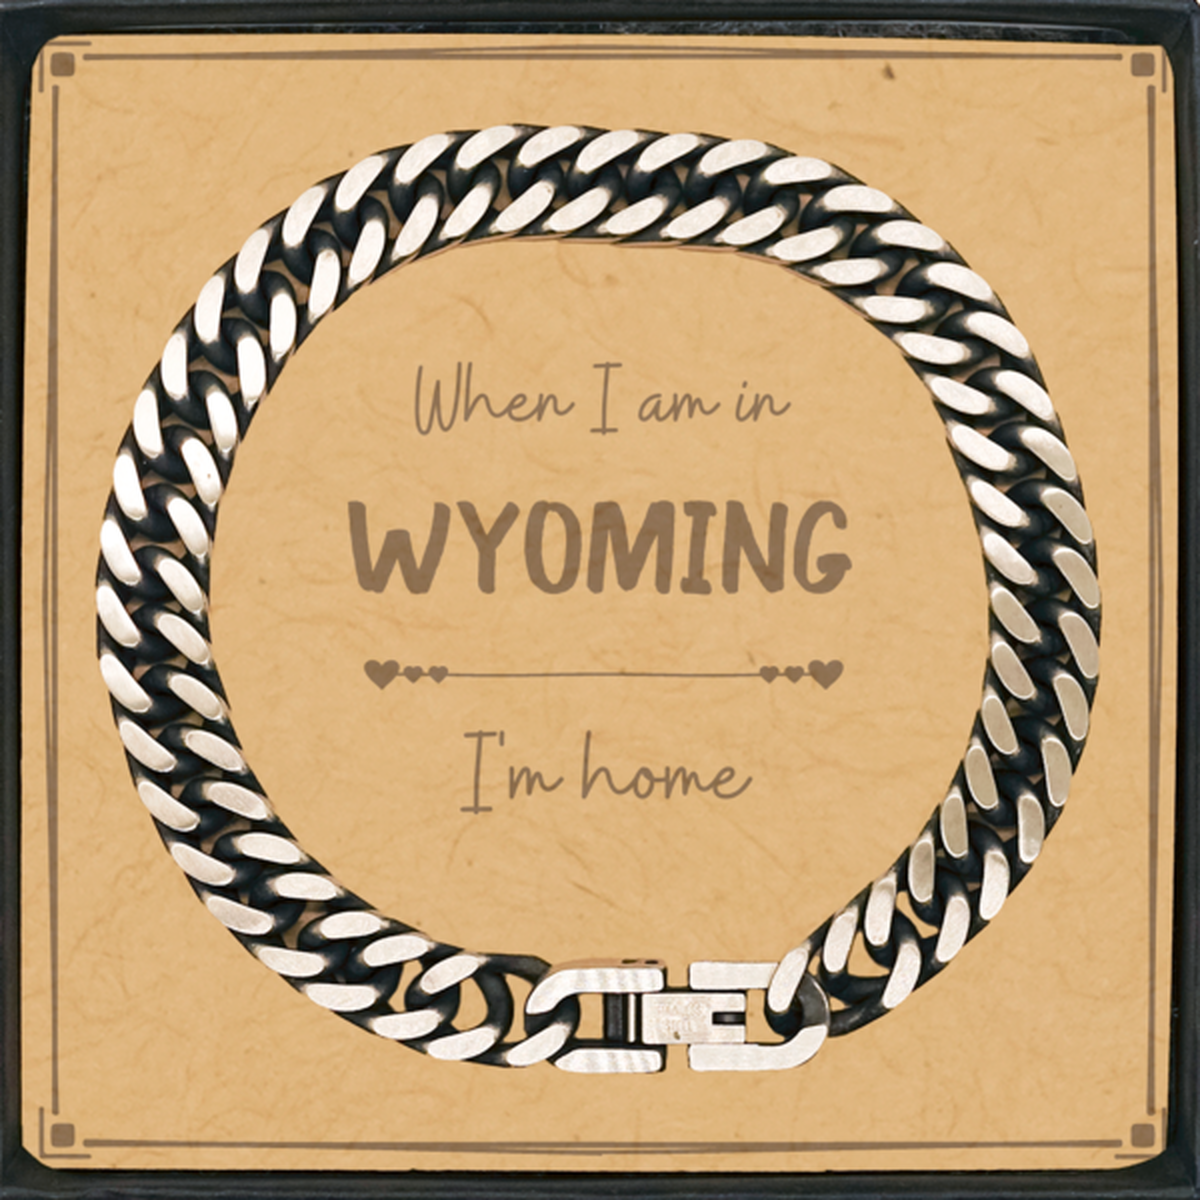 When I am in Wyoming I'm home Cuban Link Chain Bracelet, Message Card Gifts For Wyoming, State Wyoming Birthday Gifts for Friends Coworker